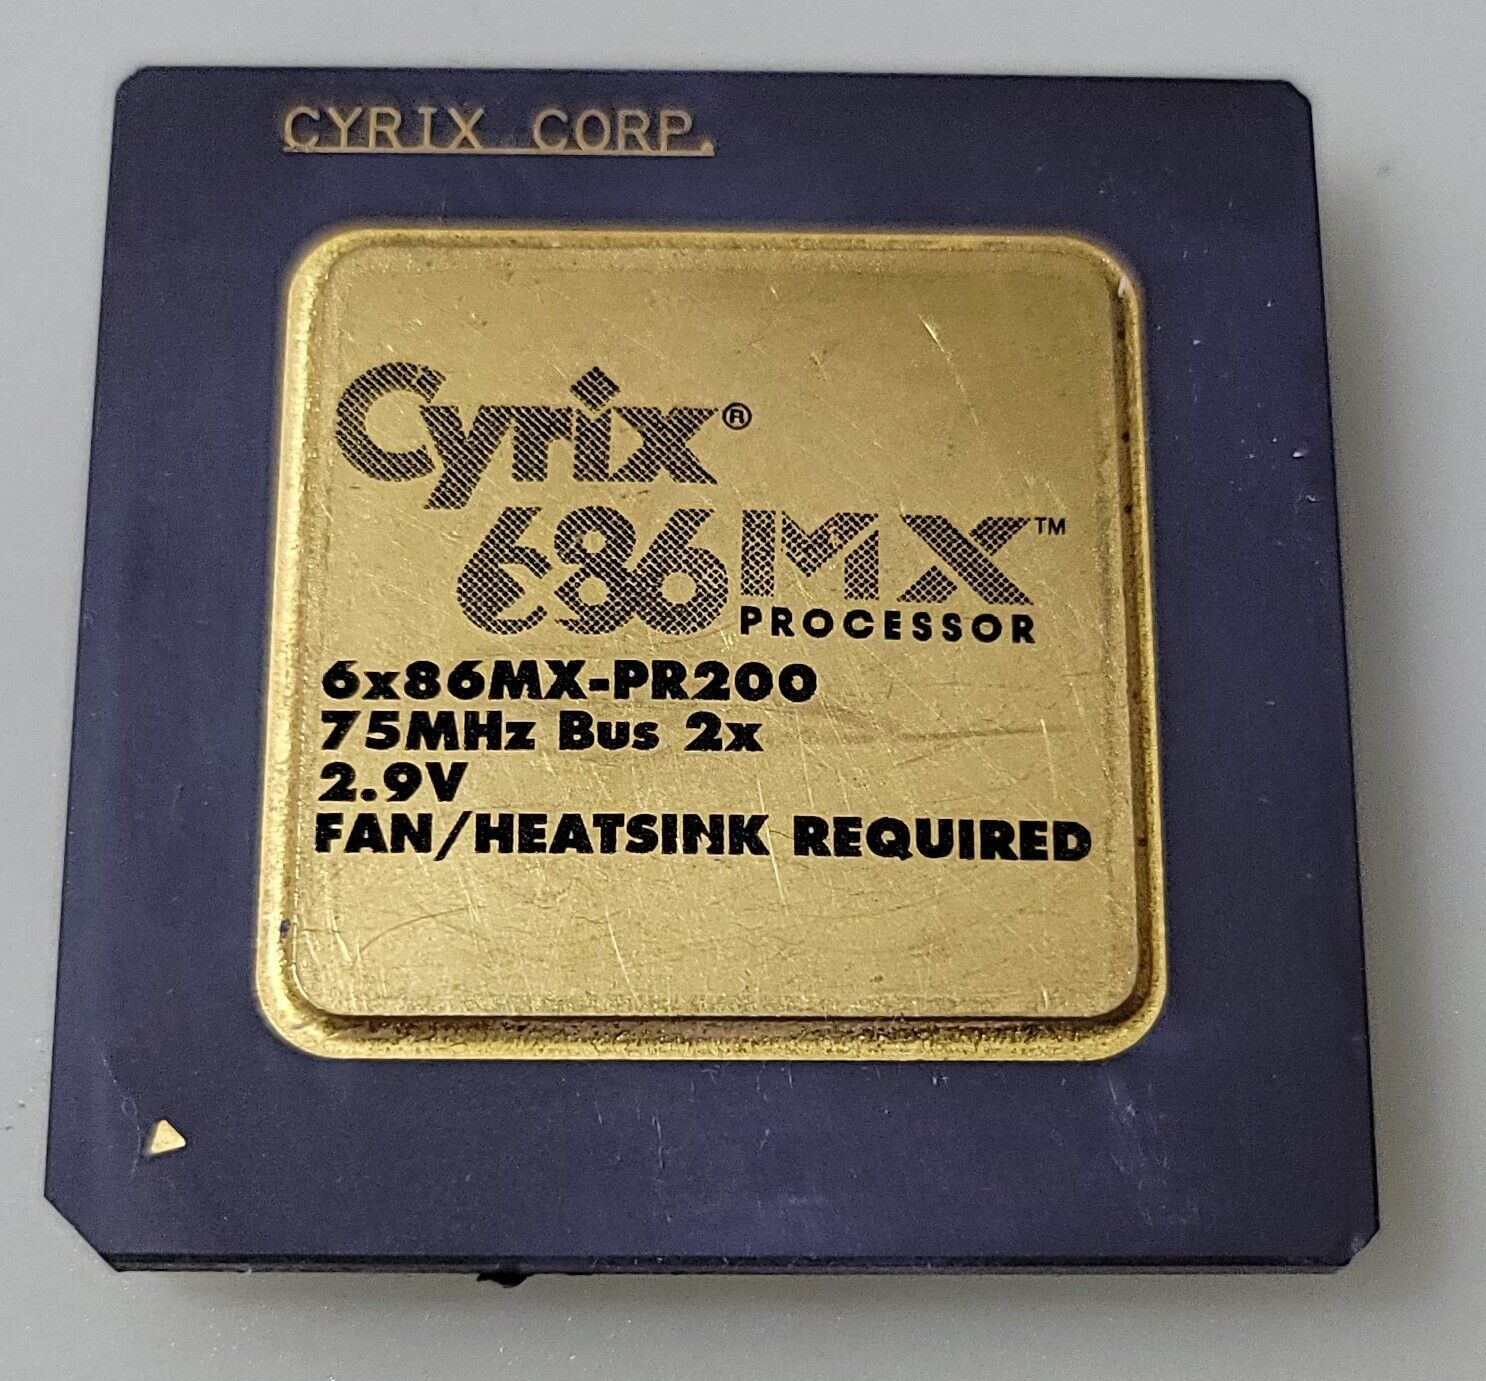 Vintage Rare Cyrix 6x86MX-PR200 75MHz Bus 2X Processor Collection/Gold Recovery